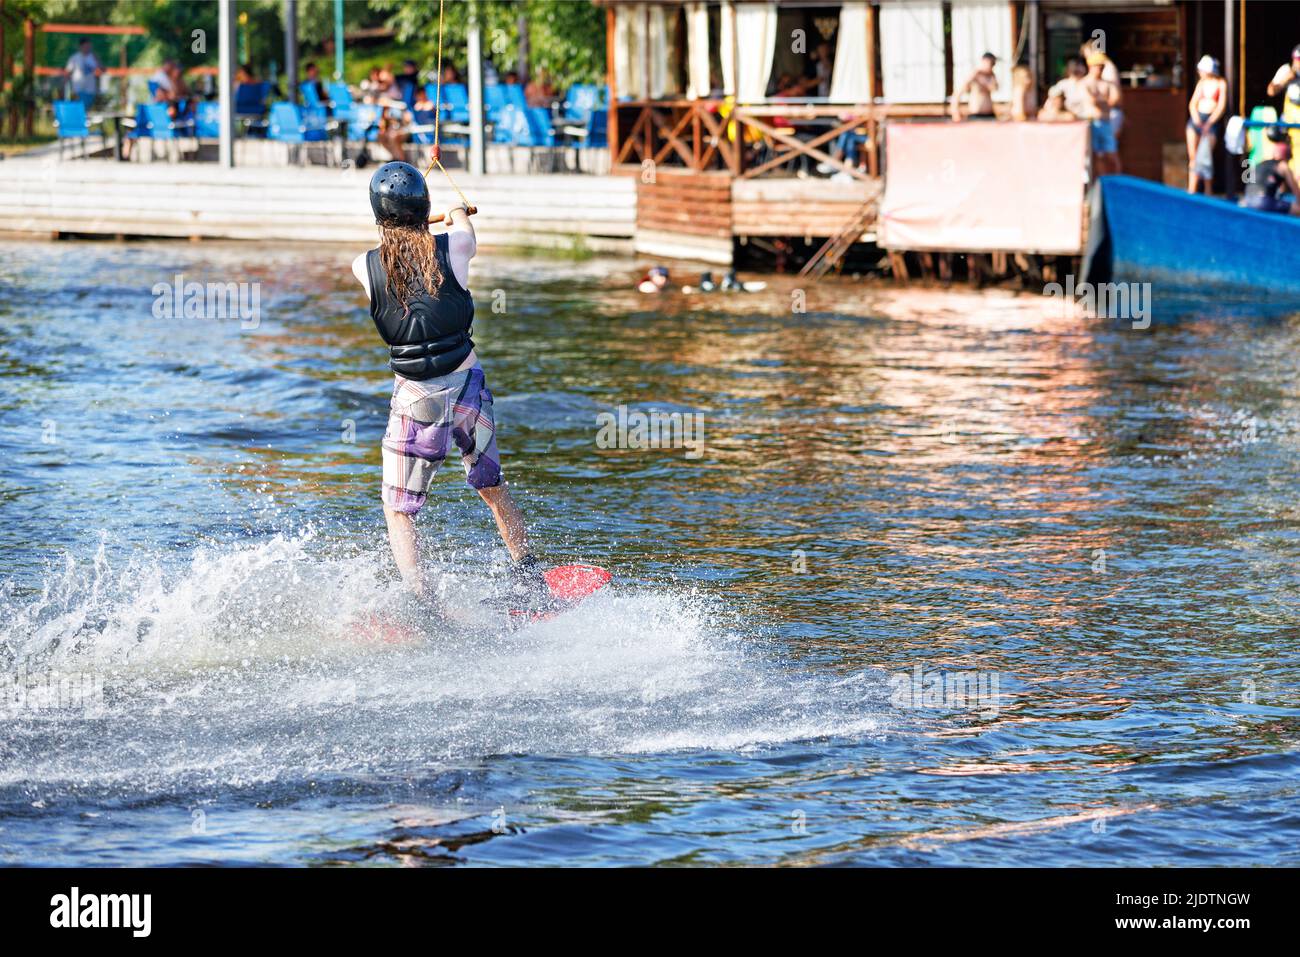 An athlete wakeboarder in a protective helmet and vest goes to the start on the summer bay of the river in front of the stands of spectators. Stock Photo